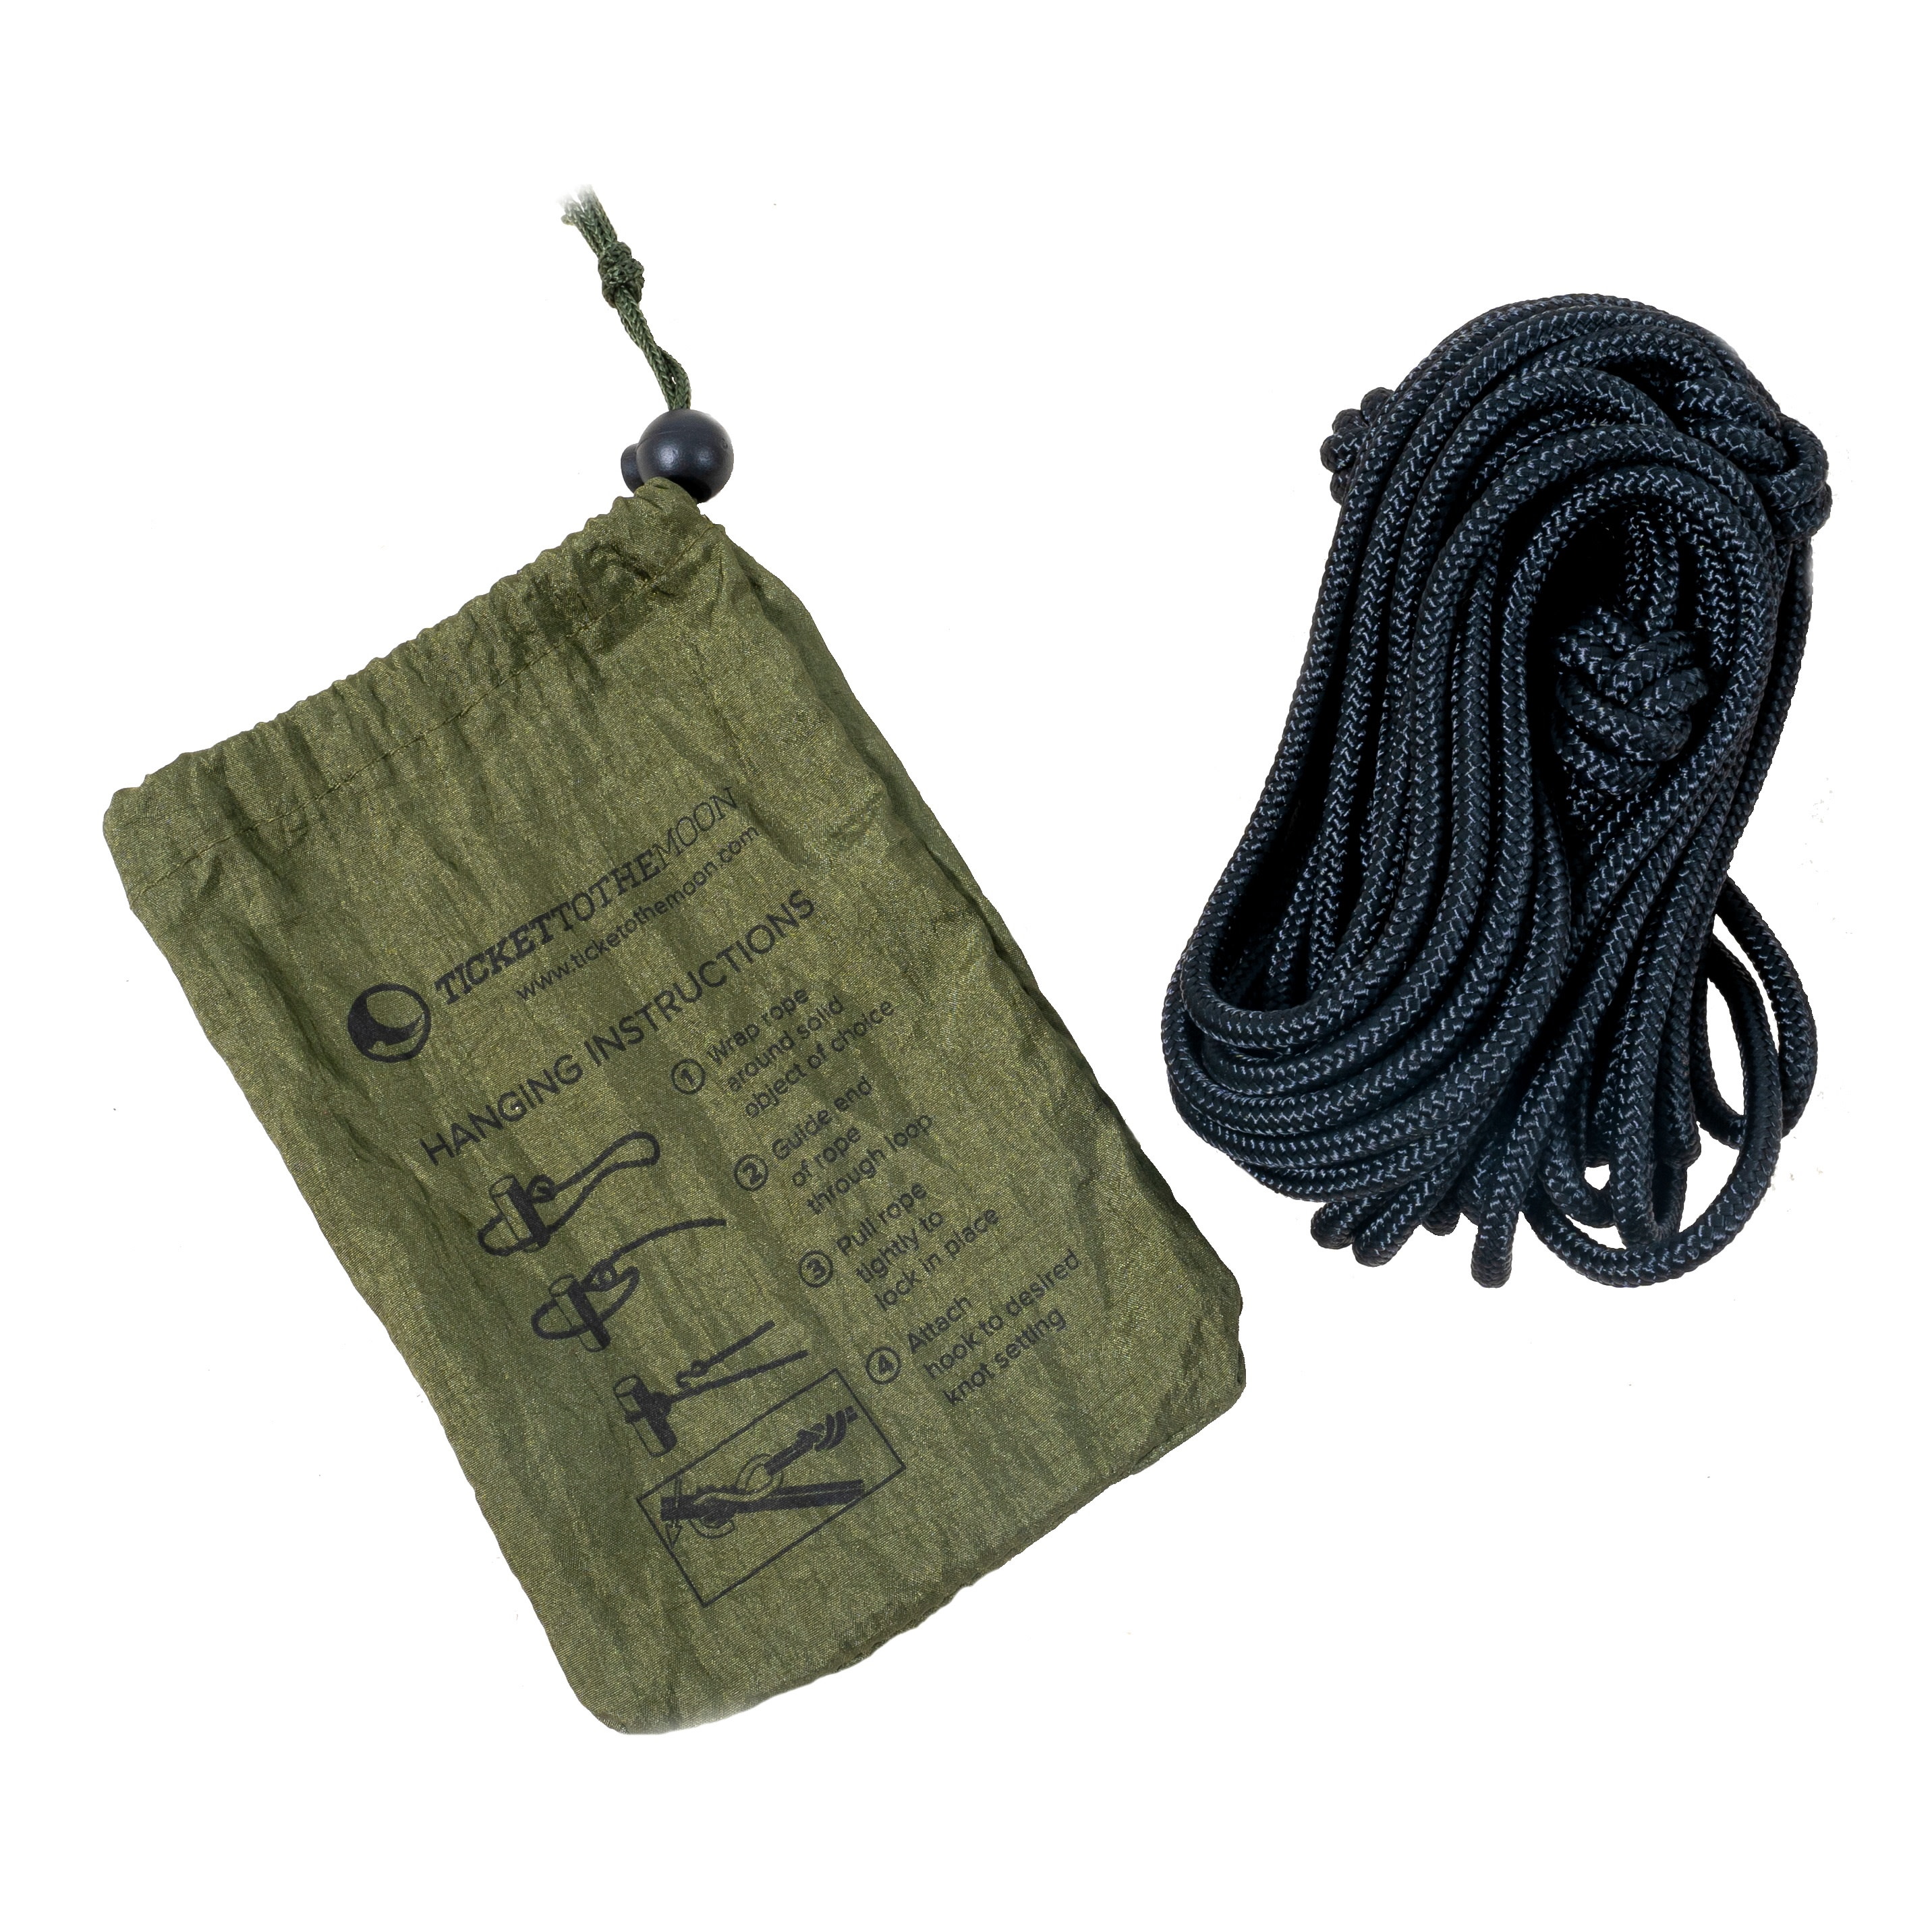 Ticket to the Moon Ticket to the Moon Hammock Attachment Rope Pouch Black OneSize, sort